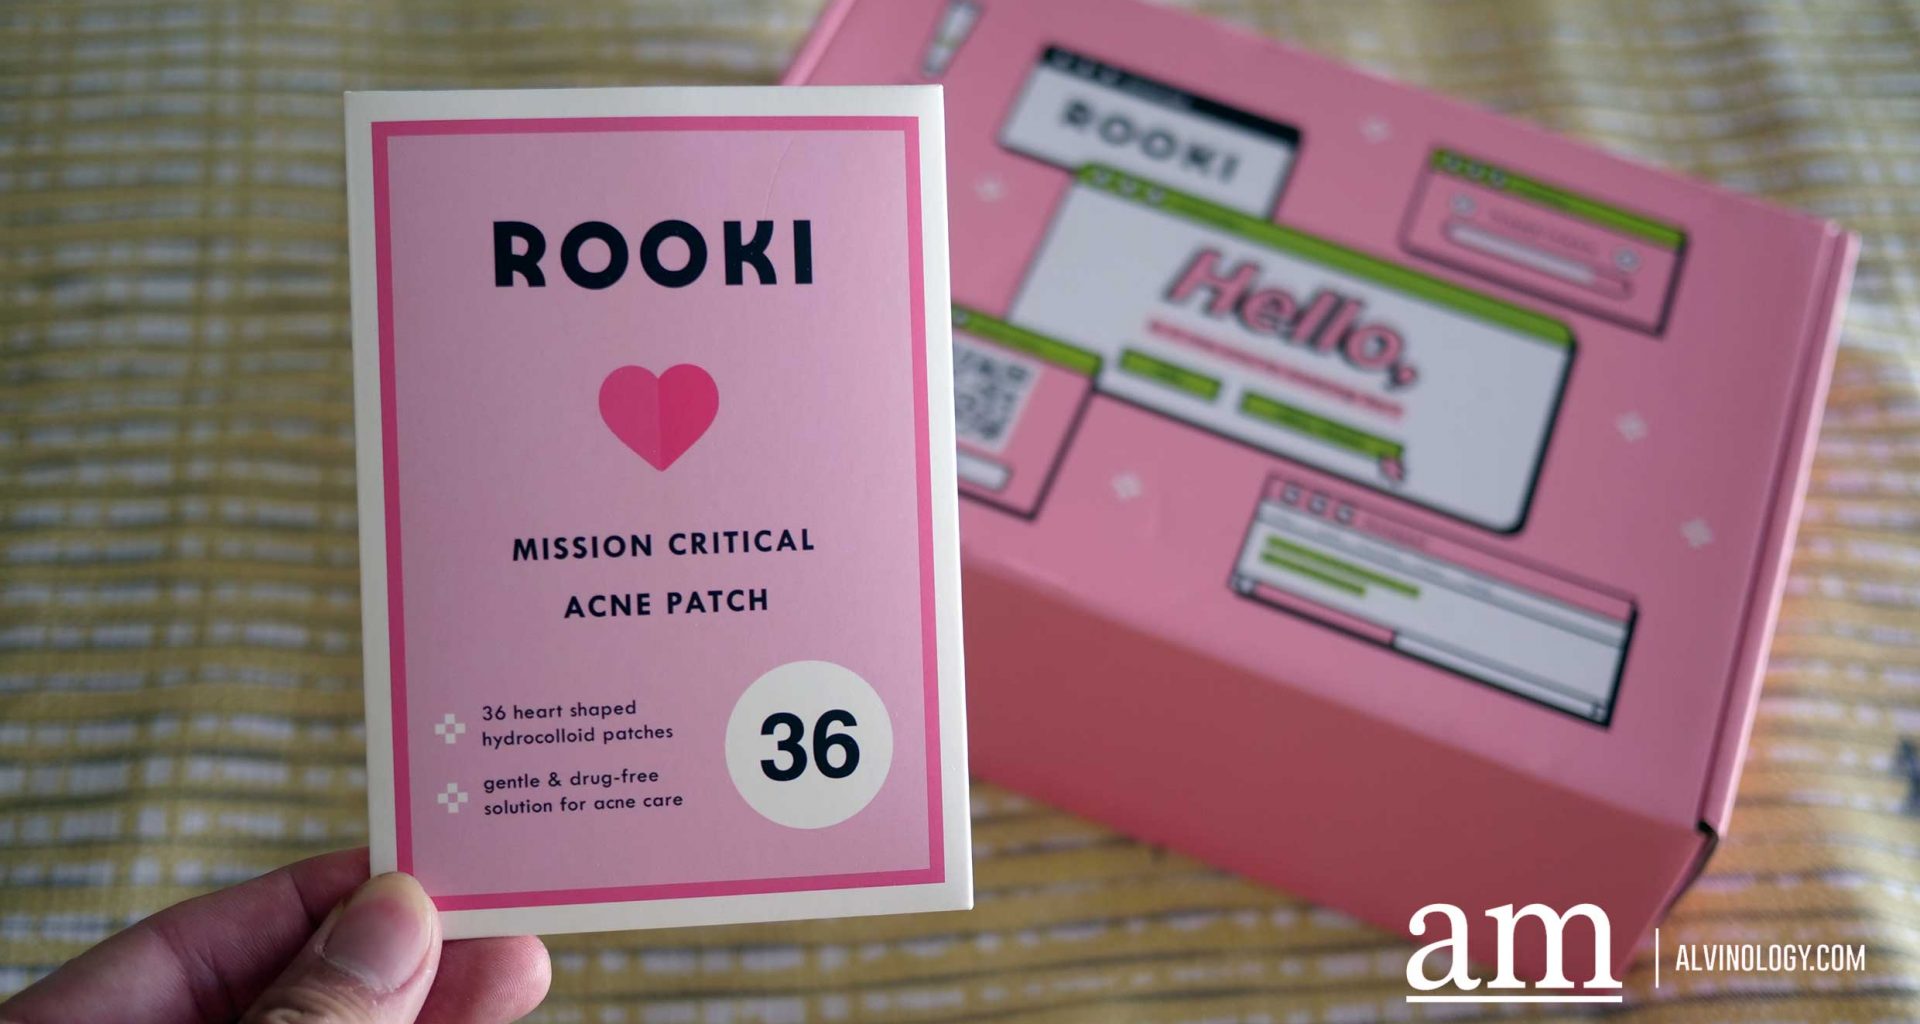 [#SupportLocal] Maskne? Rooki is here to save the day with their nEW Mission Critical Acne Patch - Alvinology